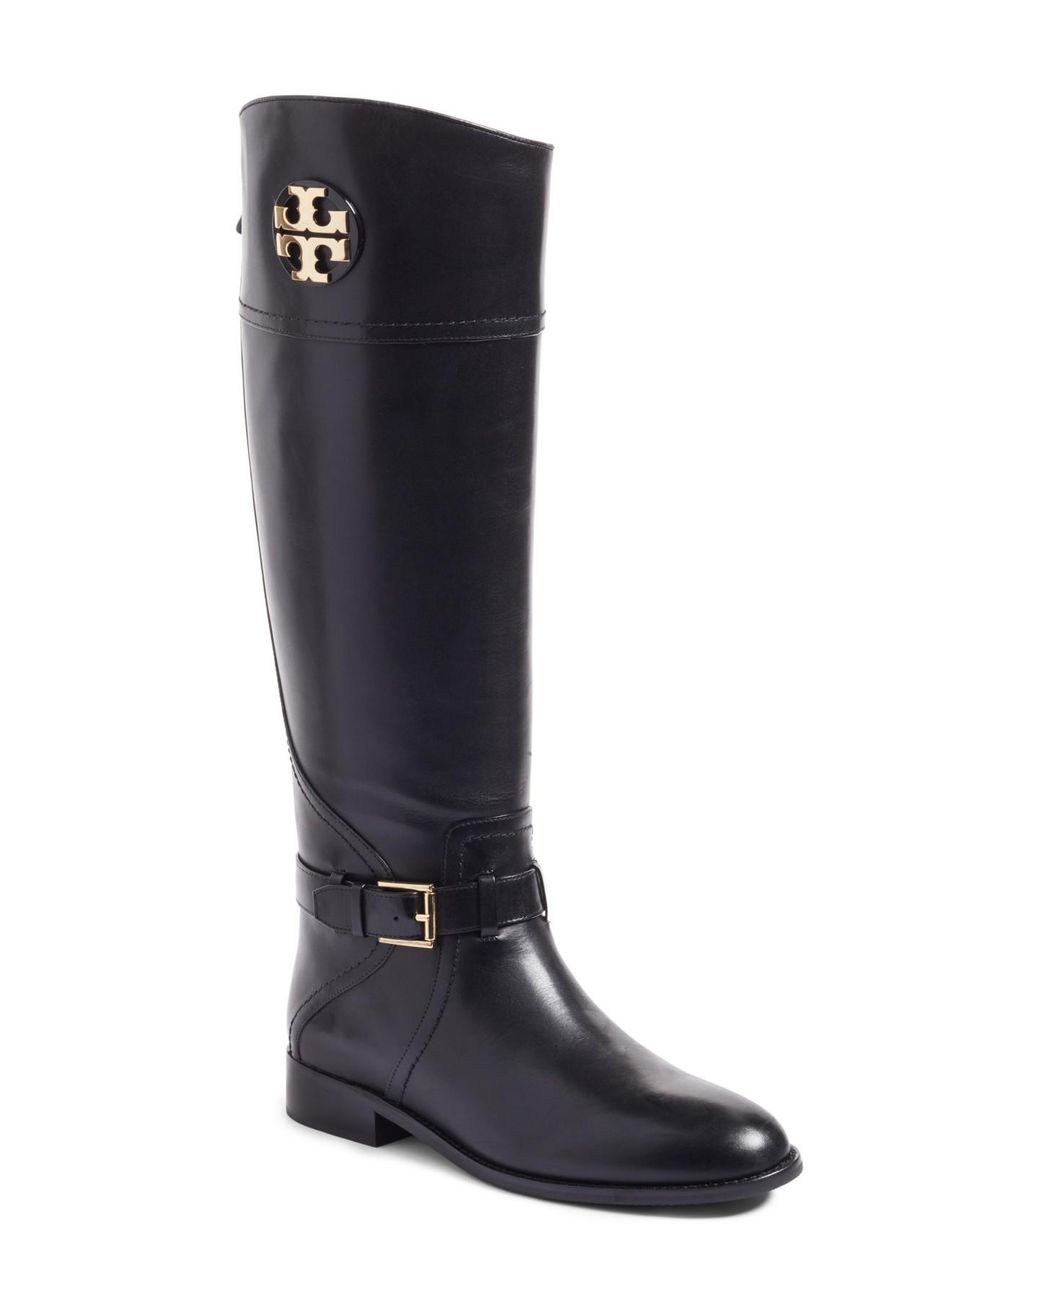 Tory Burch Leather Adeline Boots in Black | Lyst